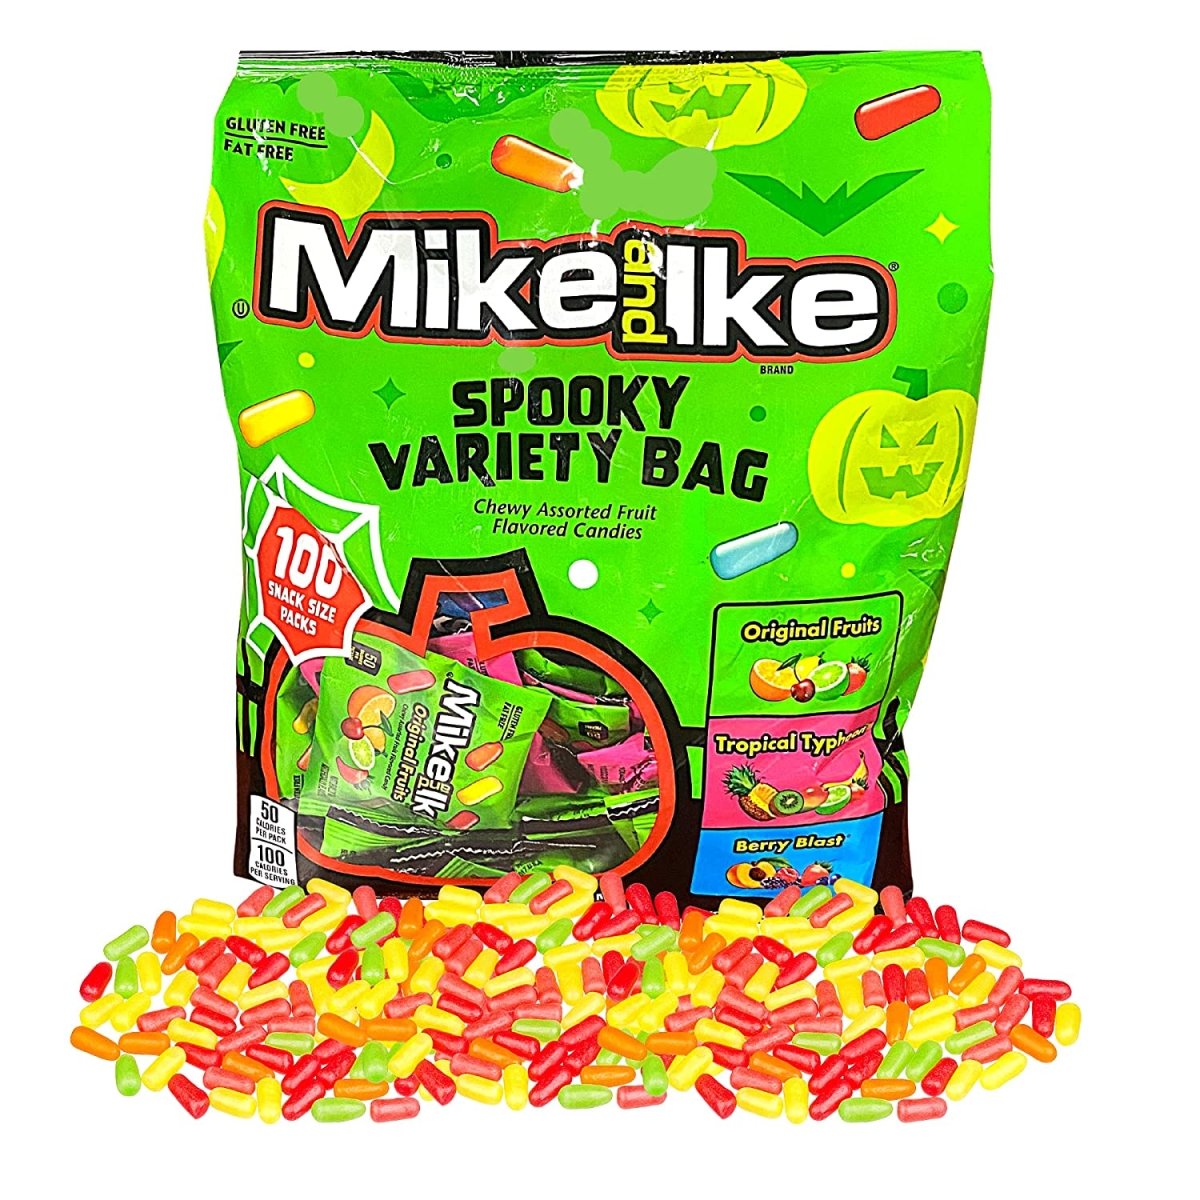 Mike and Ike Spooky Variety Bag 100 Pieces 1.42kg - Candy Mail UK